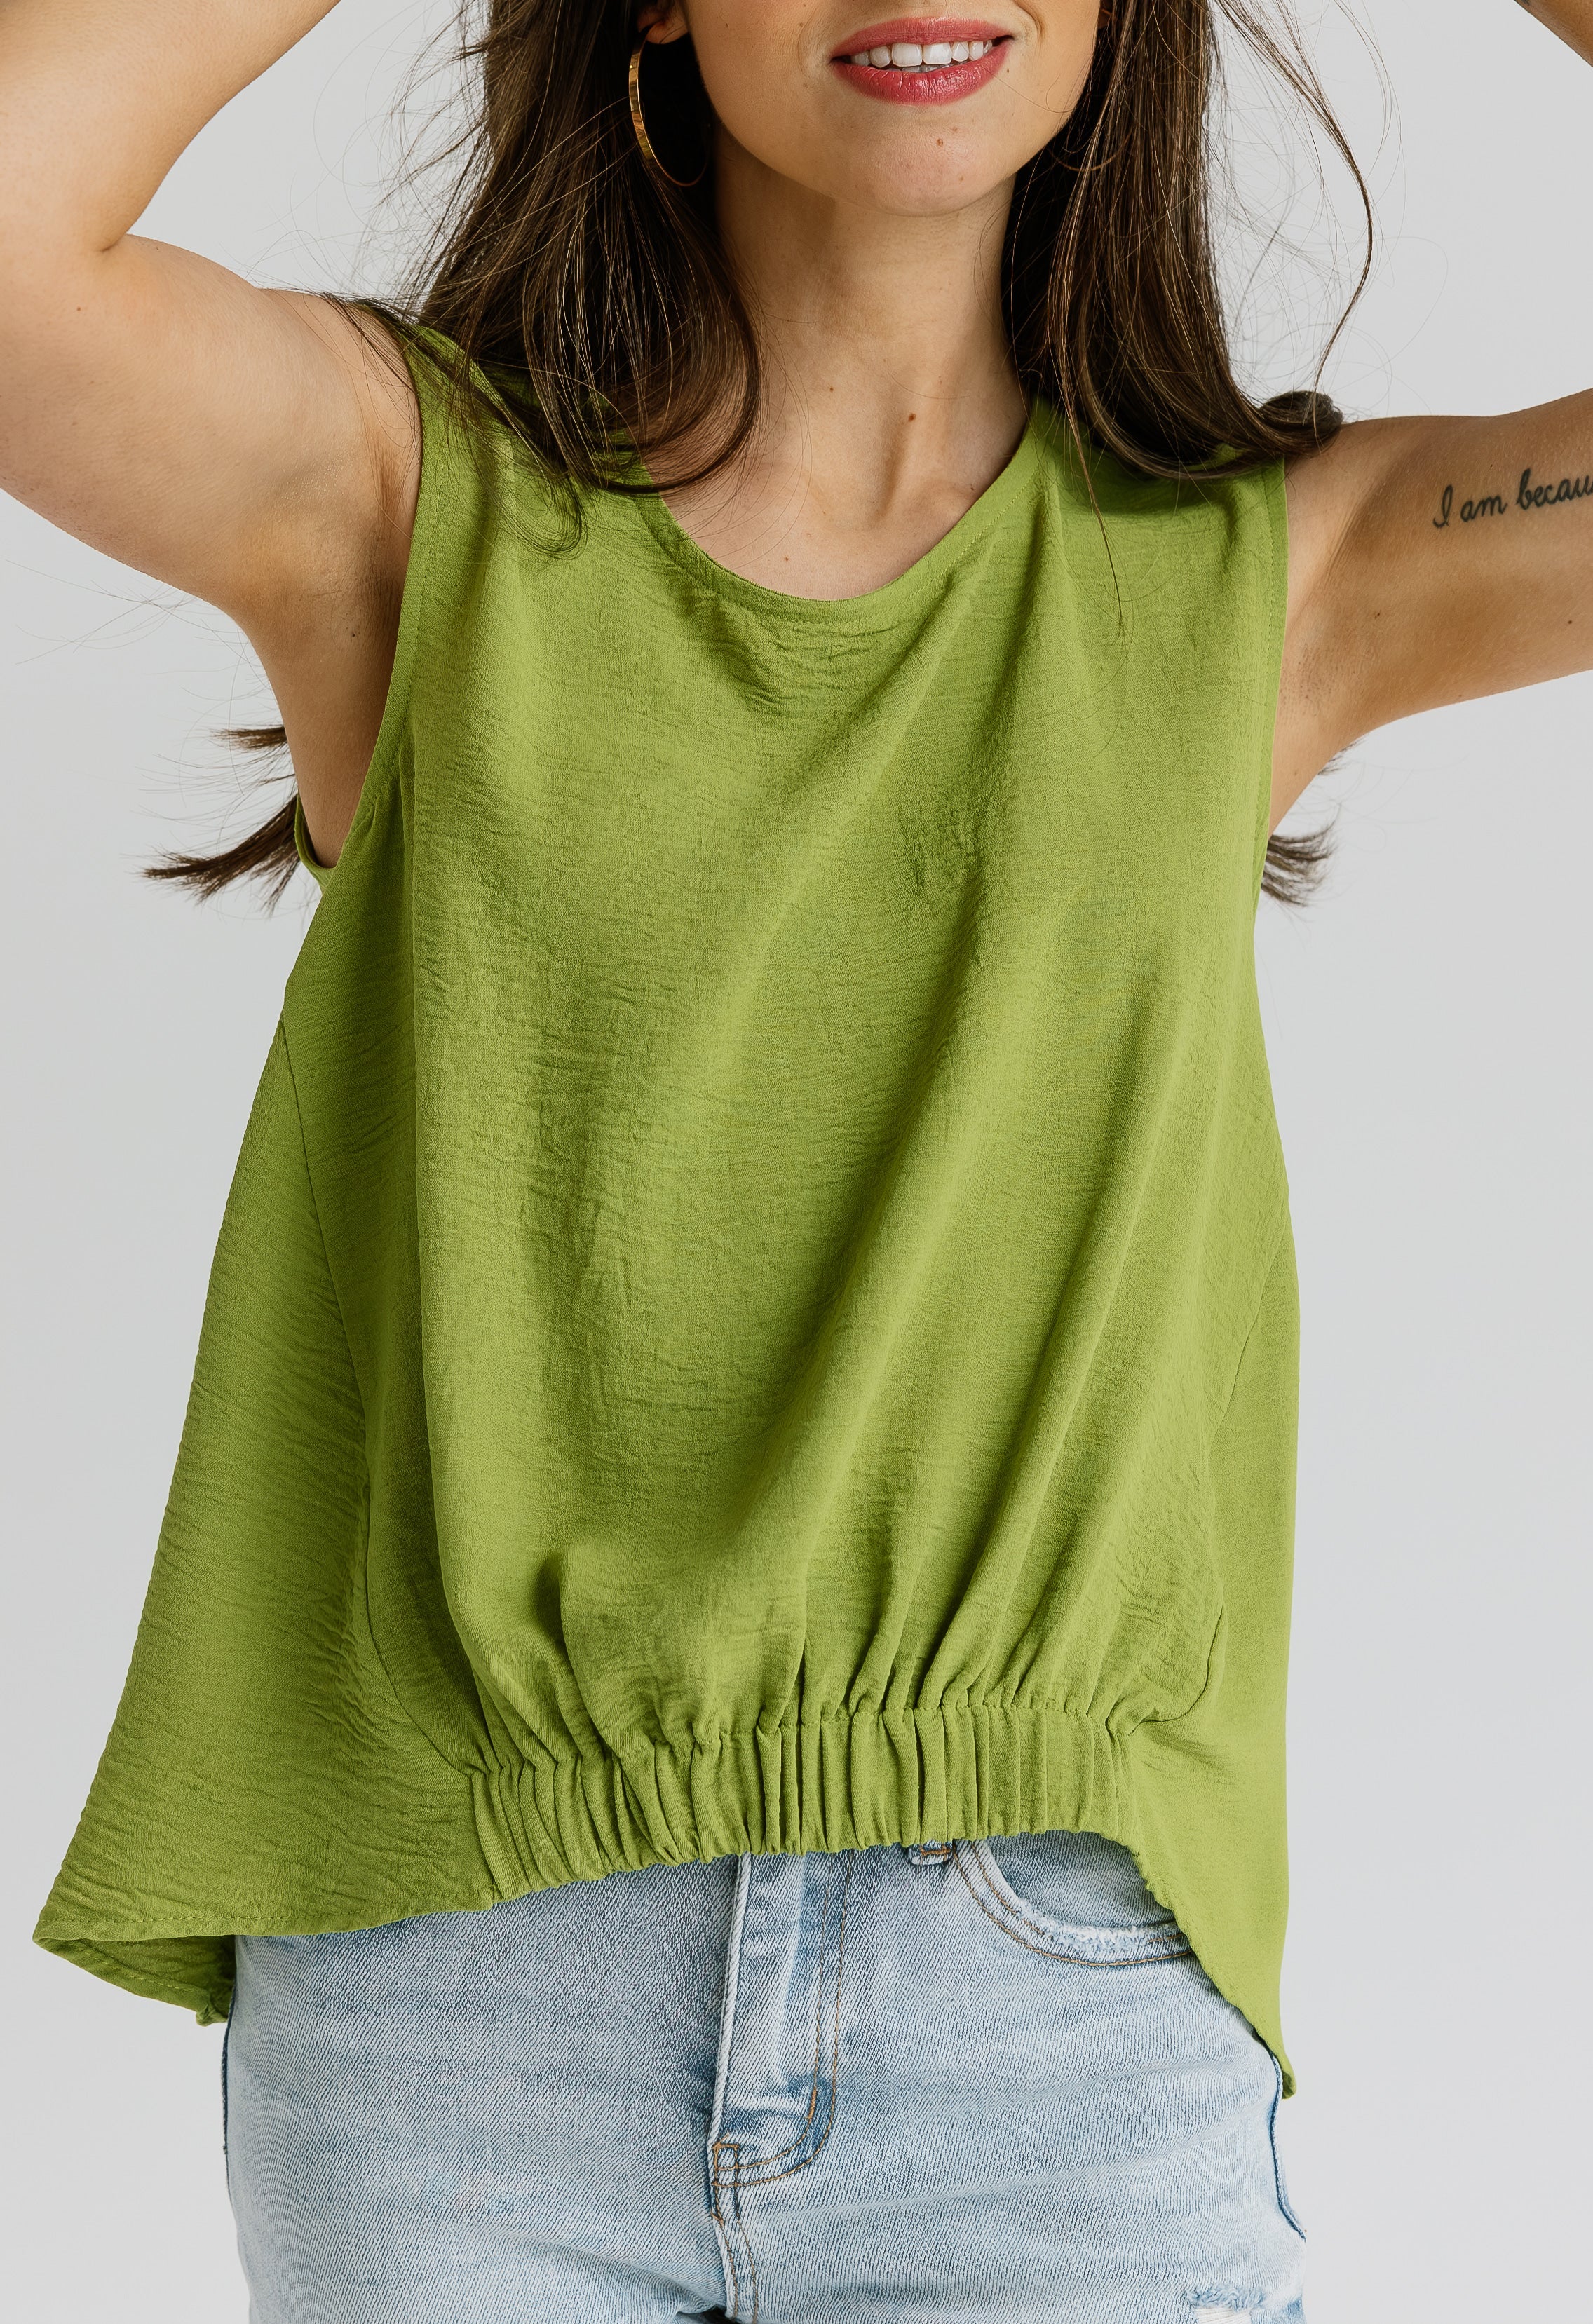 Willow & Root Square Neck Corset Tank Top - Women's Tank Tops in